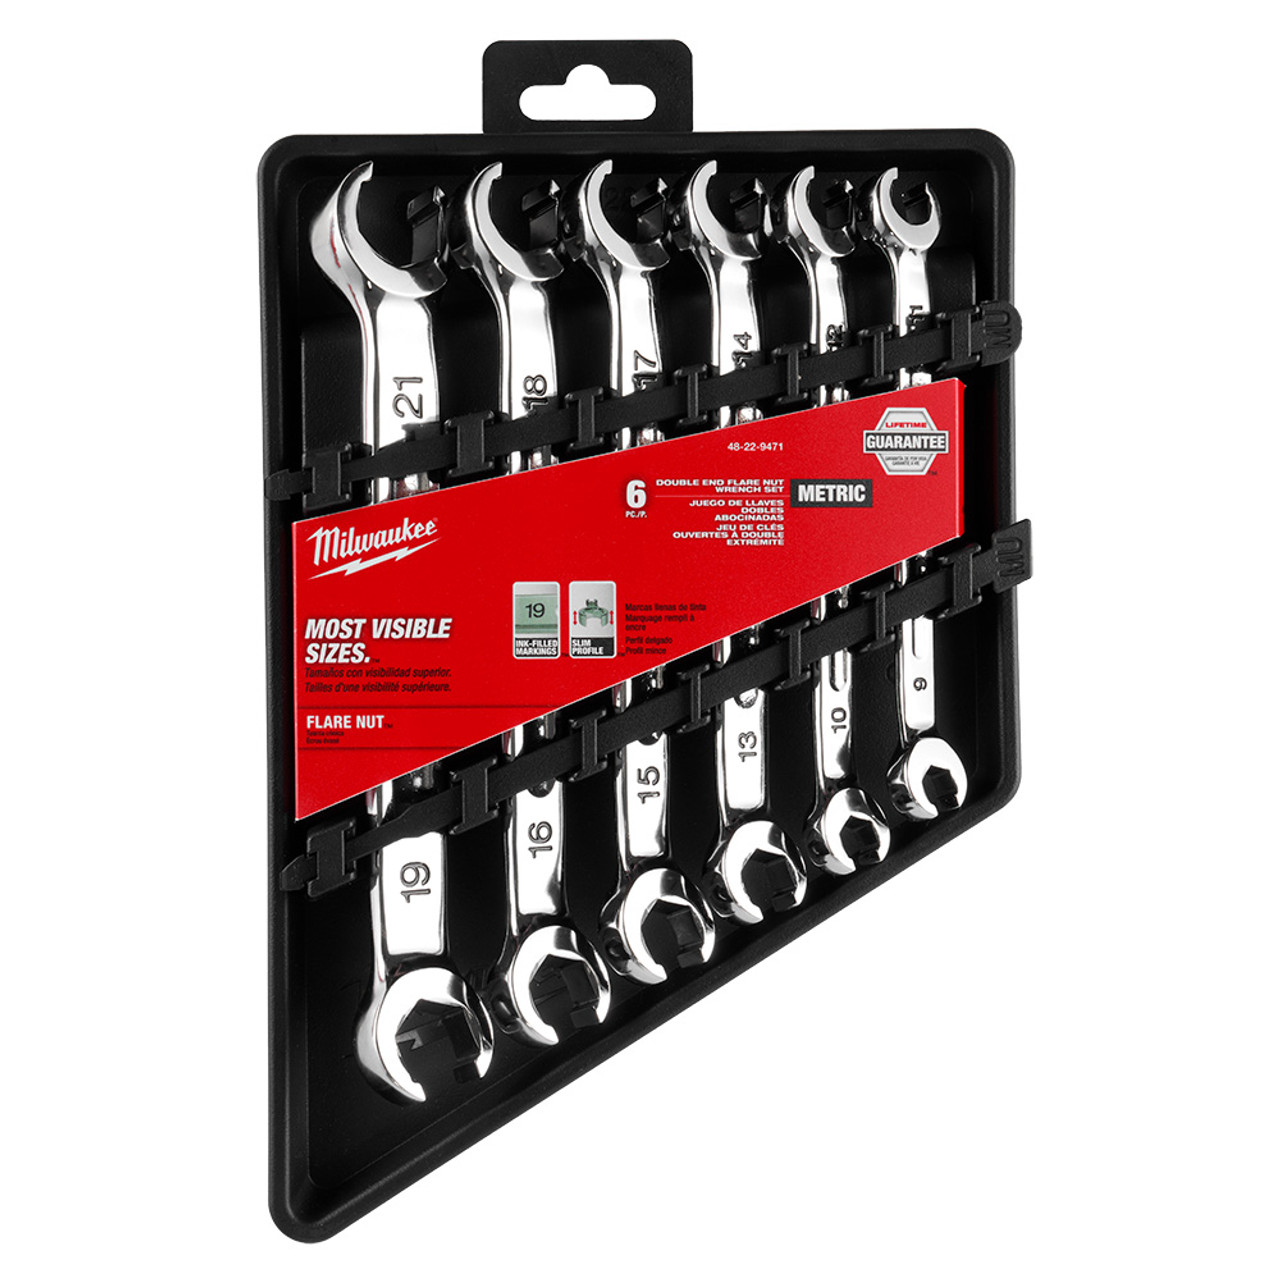 Milwaukee 48-22-9471 6pc Double End Flare Nut Wrench Set